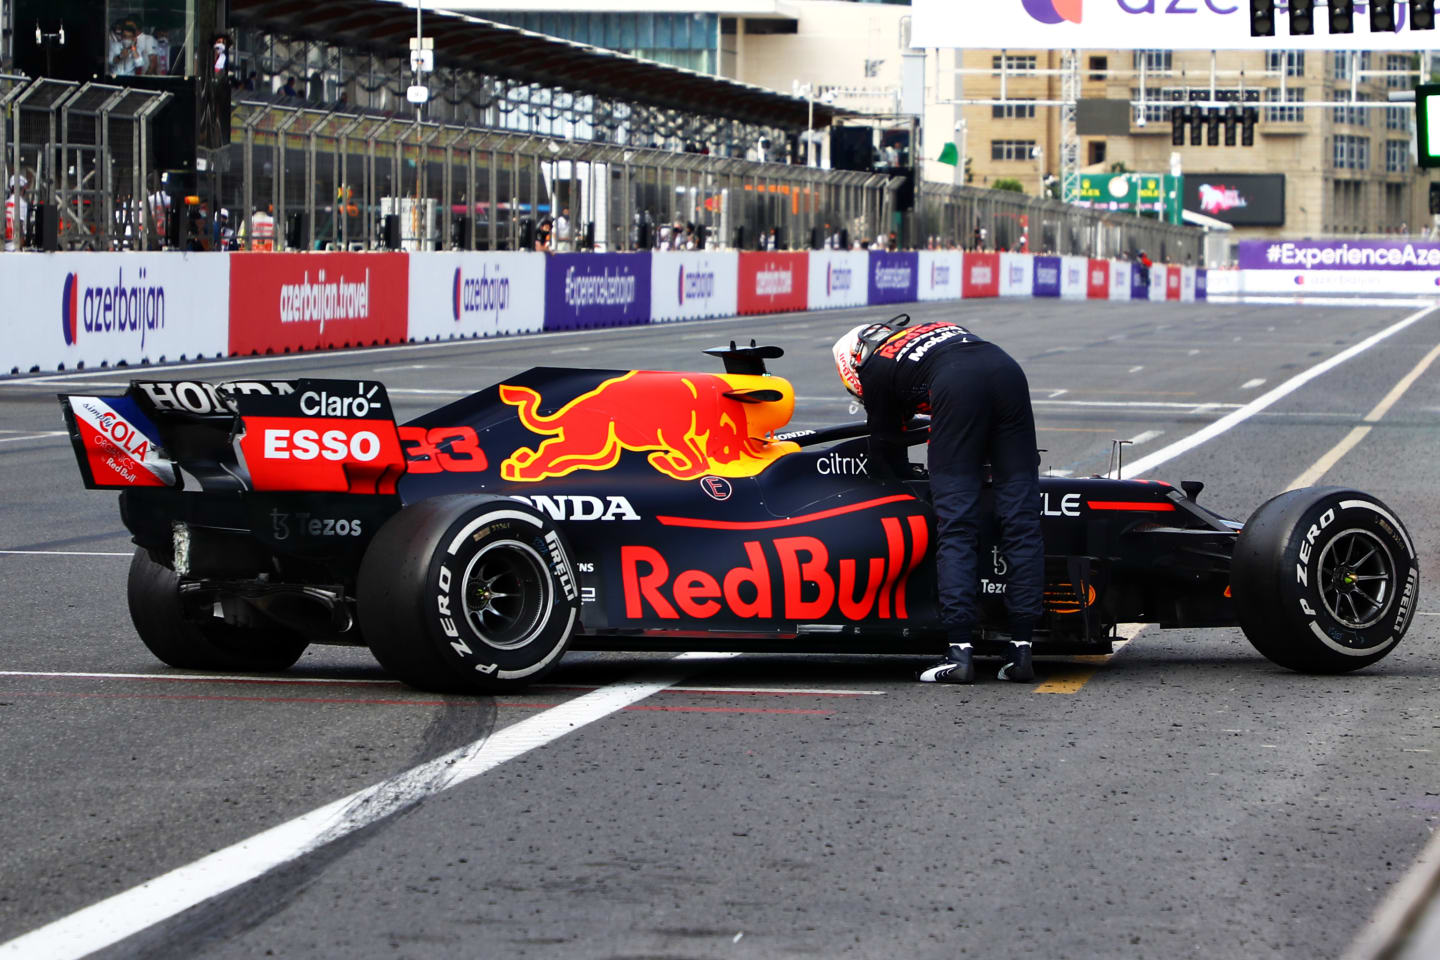 Verstappen crashed whilst cruising out front in Baku, leading to a red flag period